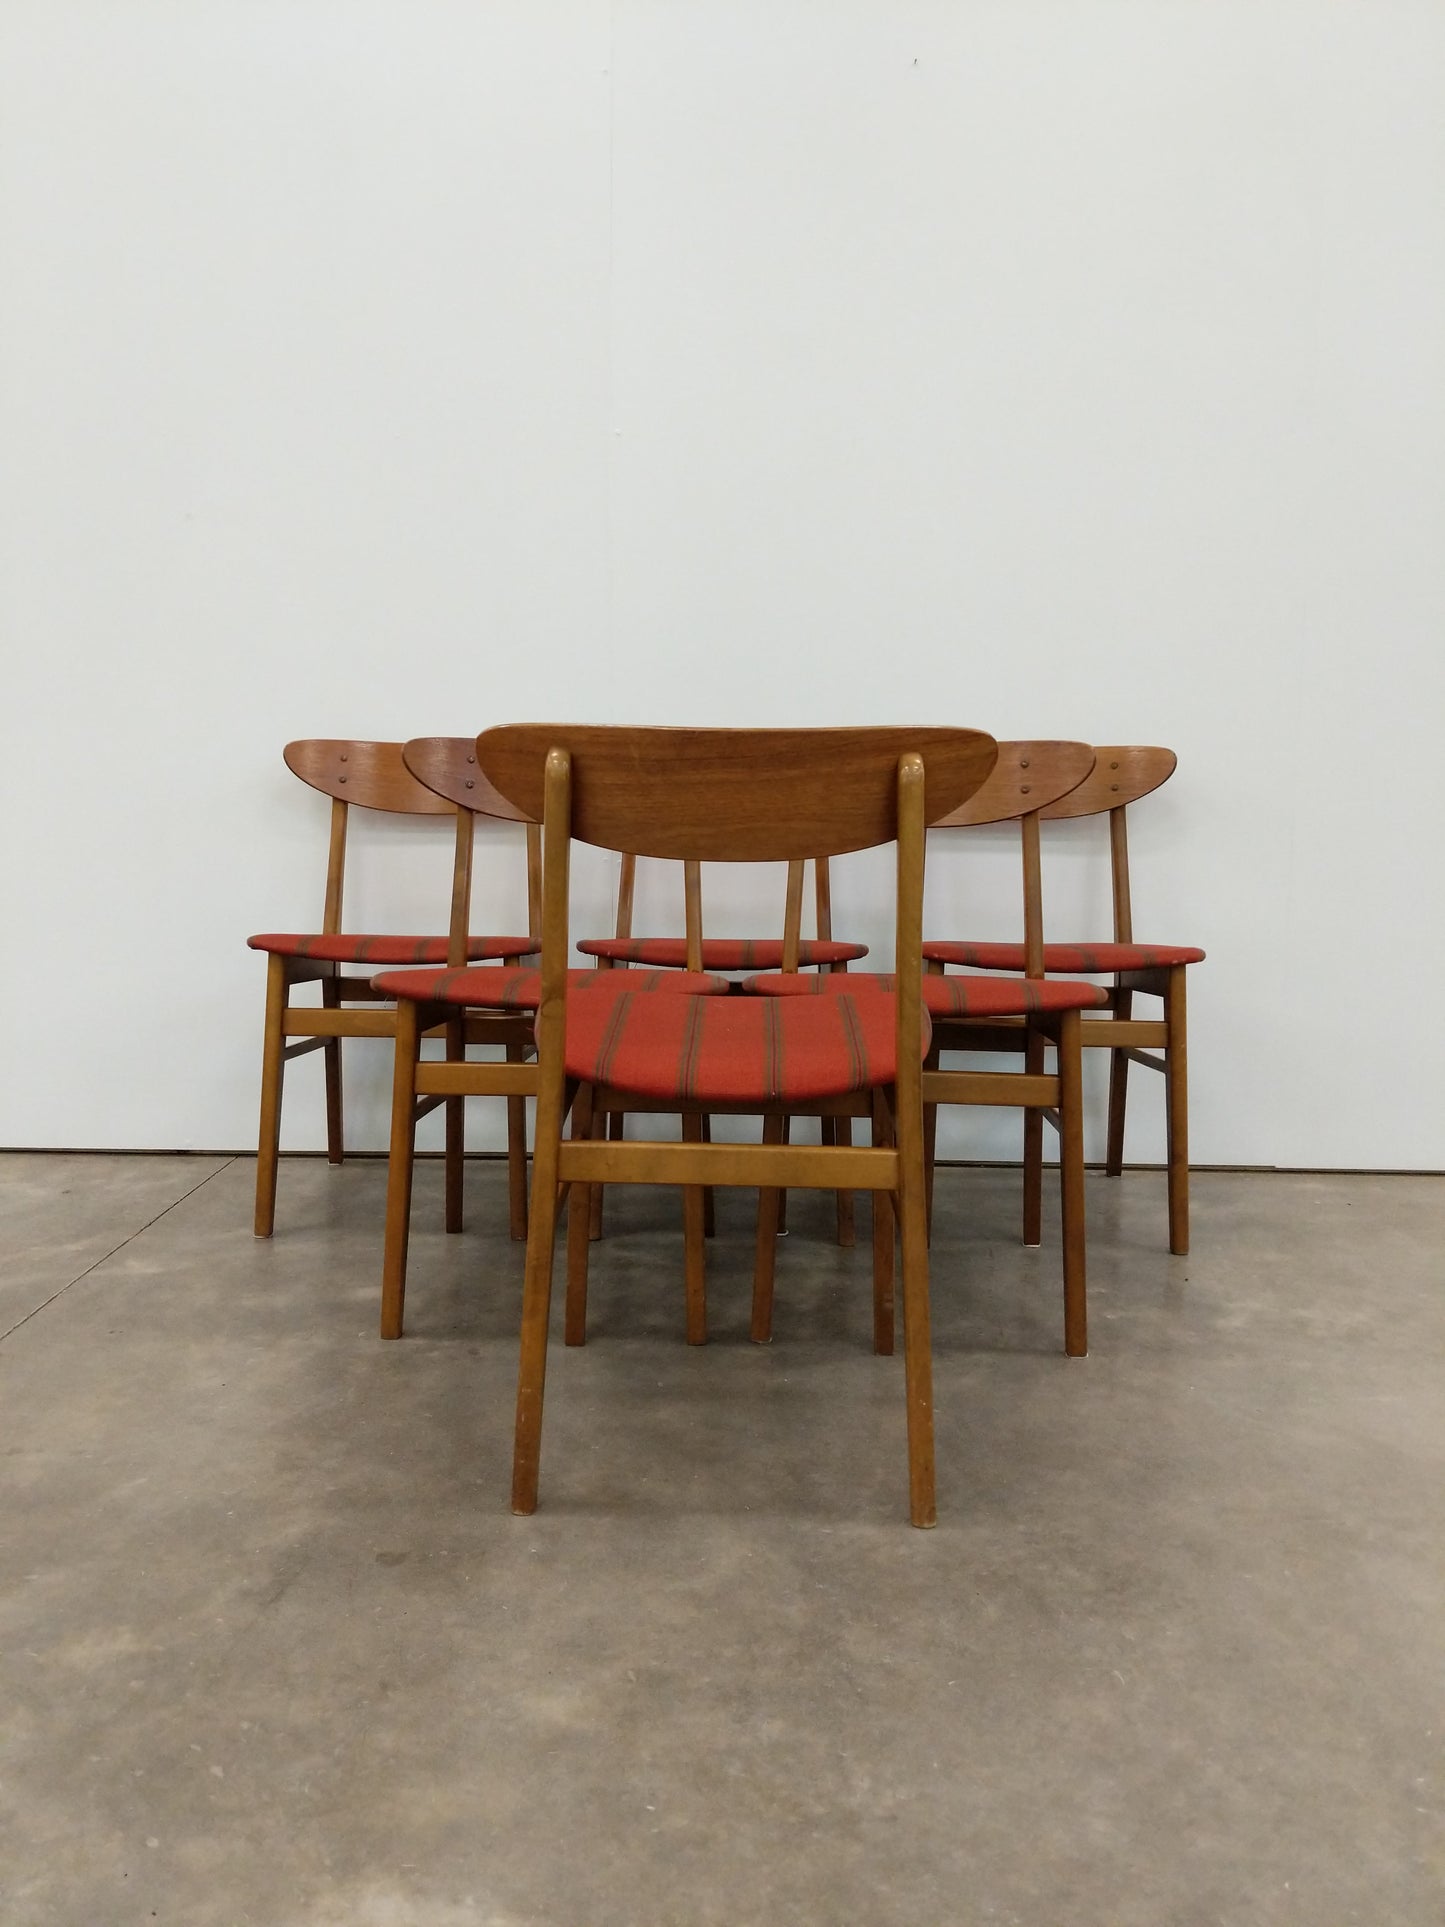 Set of 6 Vintage Danish Modern Dining Chairs by Farstrup